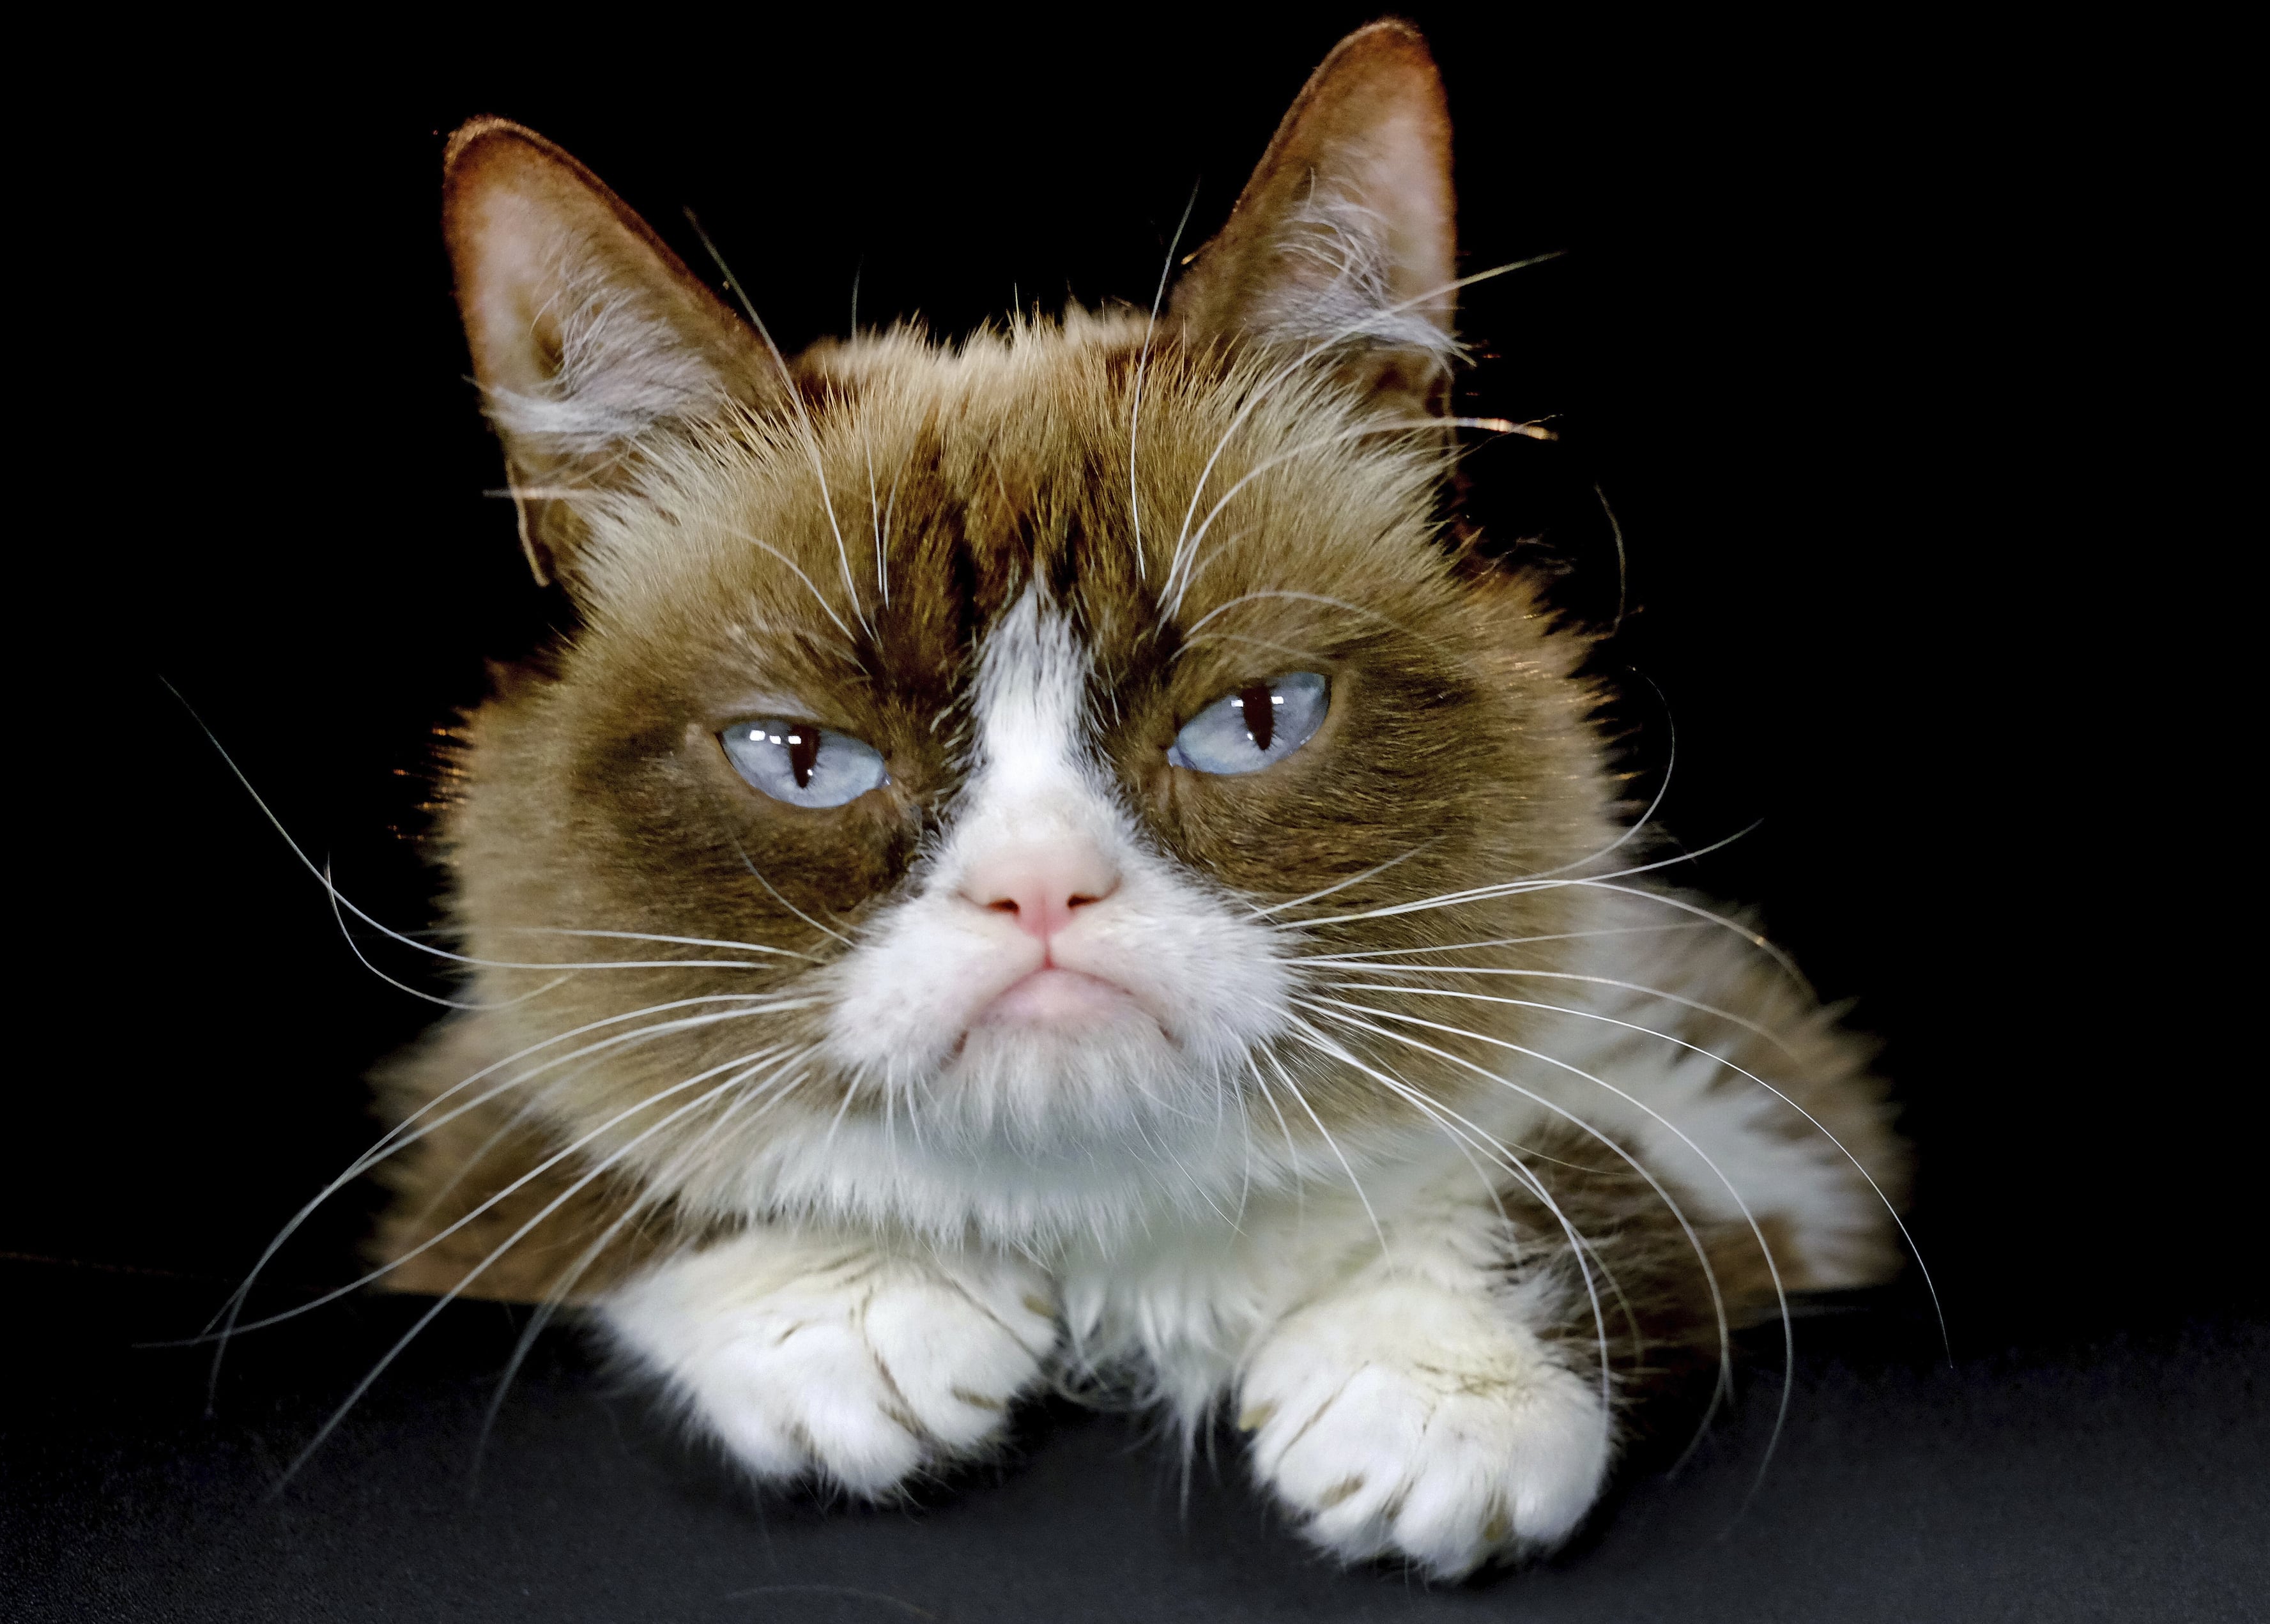 FILE - This Dec. 1, 2015 file photo shows Grumpy Cat posing for a photo in Los Angeles. Grumpy Cat, whose sour puss became an internet sensation, has died at age 7, according to her owners. Posting on social media Friday, May 17, 2019, her owners wrote Grumpy experienced complications from a urinary tract infection and “passed away peacefully” in the arms of her mother on Tuesday, May 14.